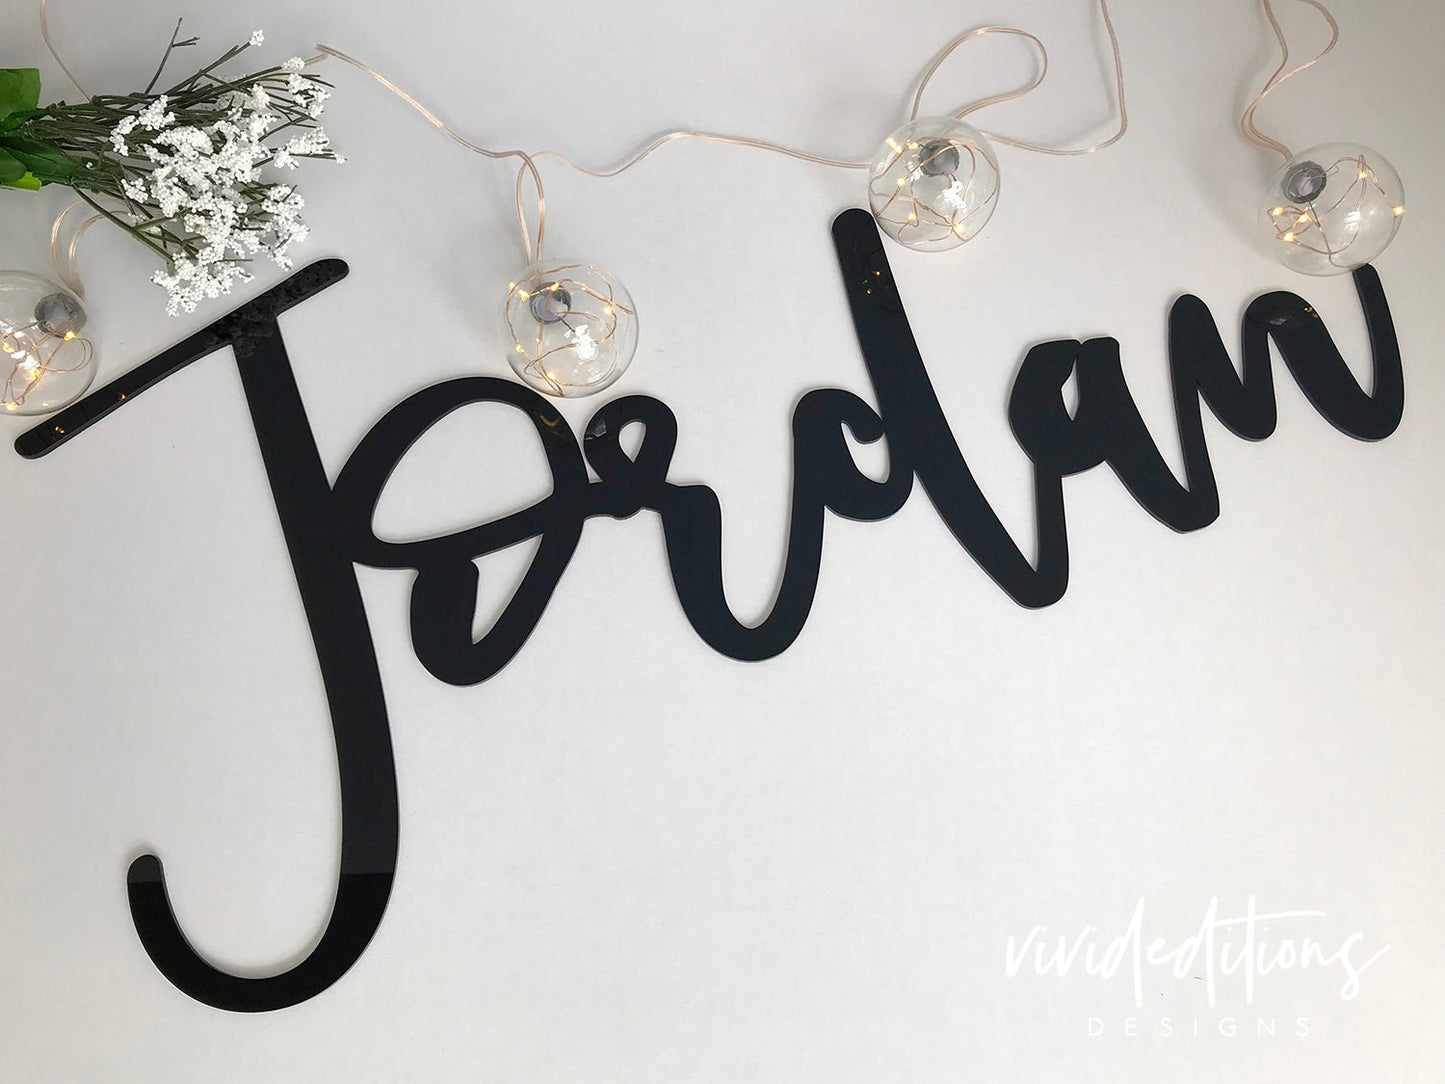 24” Silver Mirror Medium Personalized Name Sign - VividEditions